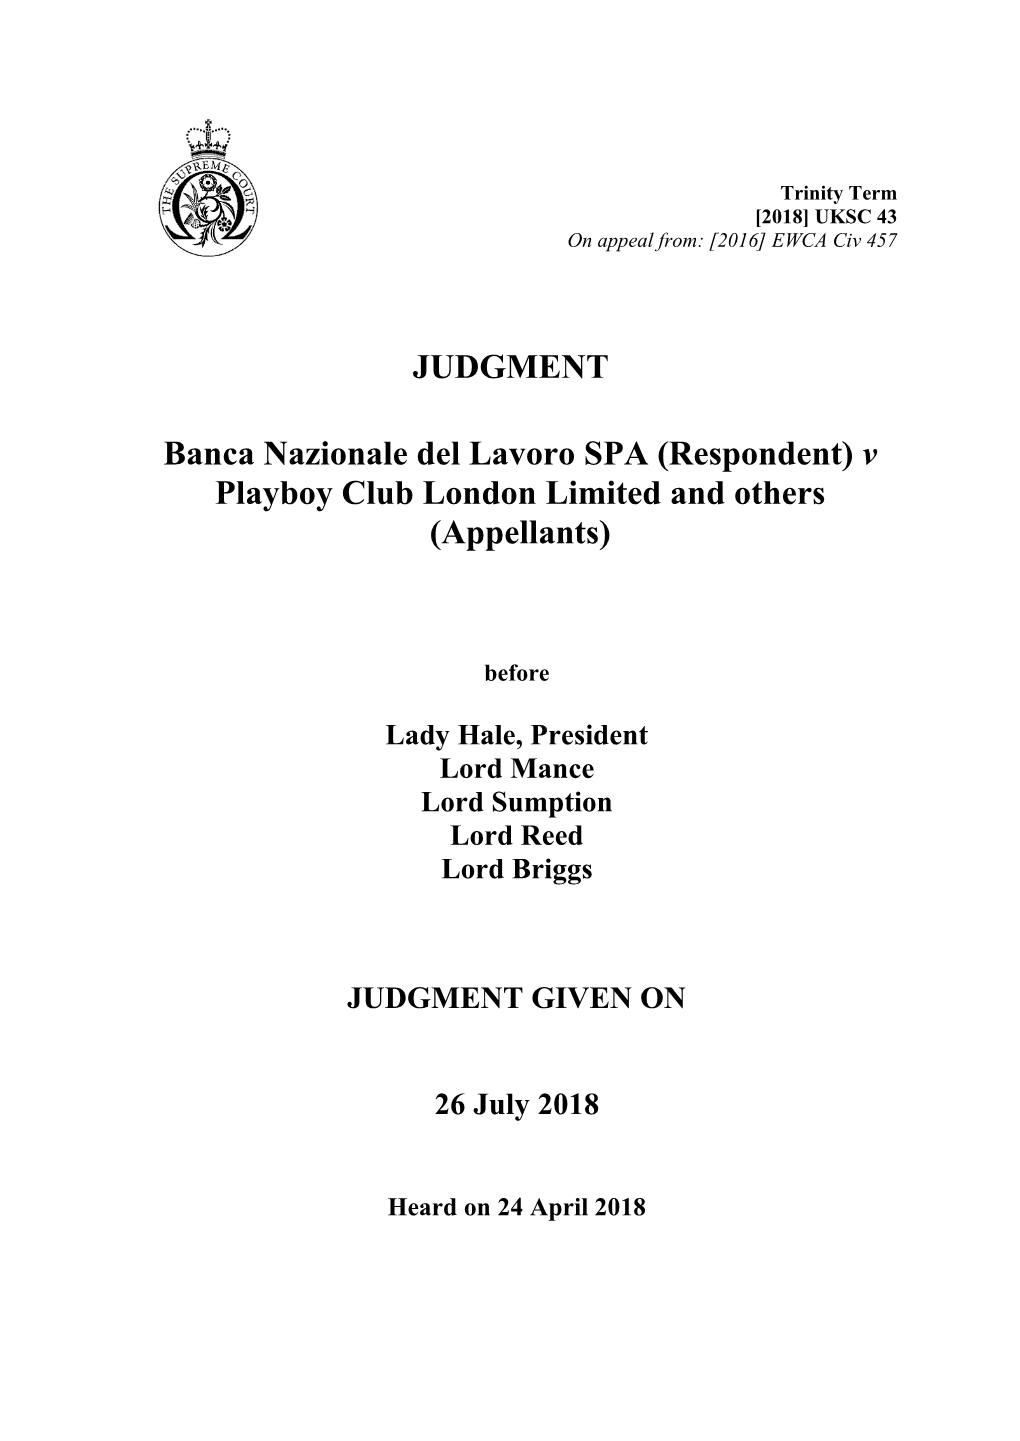 Banca Nazionale Del Lavoro SPA (Respondent) V Playboy Club London Limited and Others (Appellants)